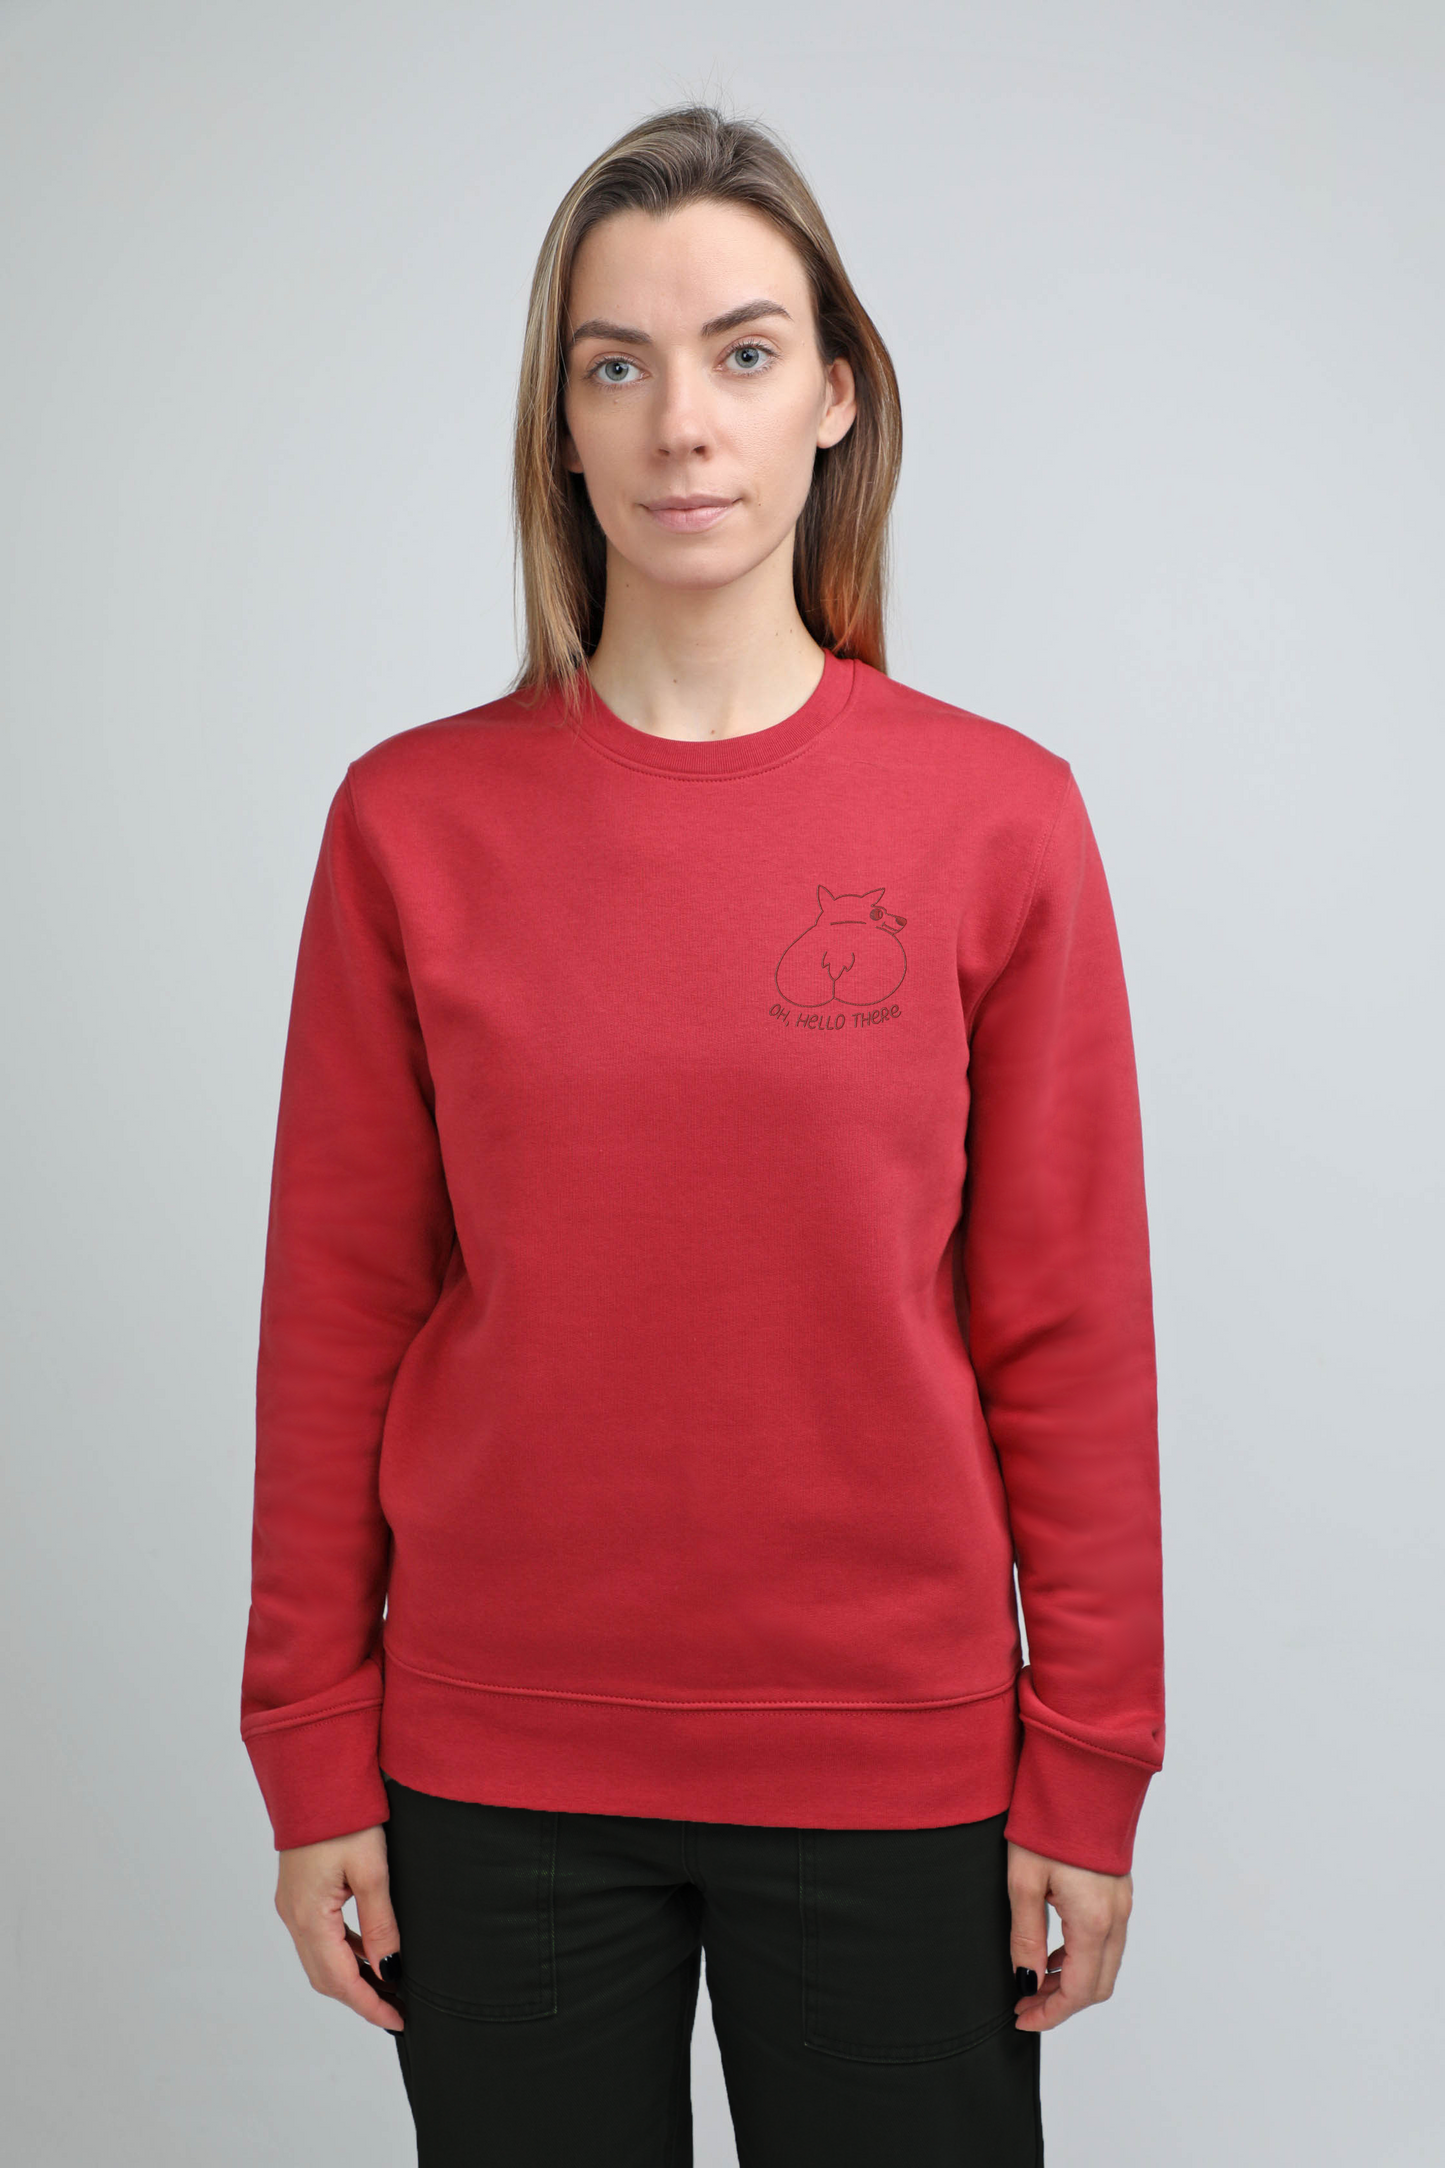 S available only | Oh, hello there! | Crew neck sweatshirt with embroidered dog. Regular fit | Unisex by My Wild Other